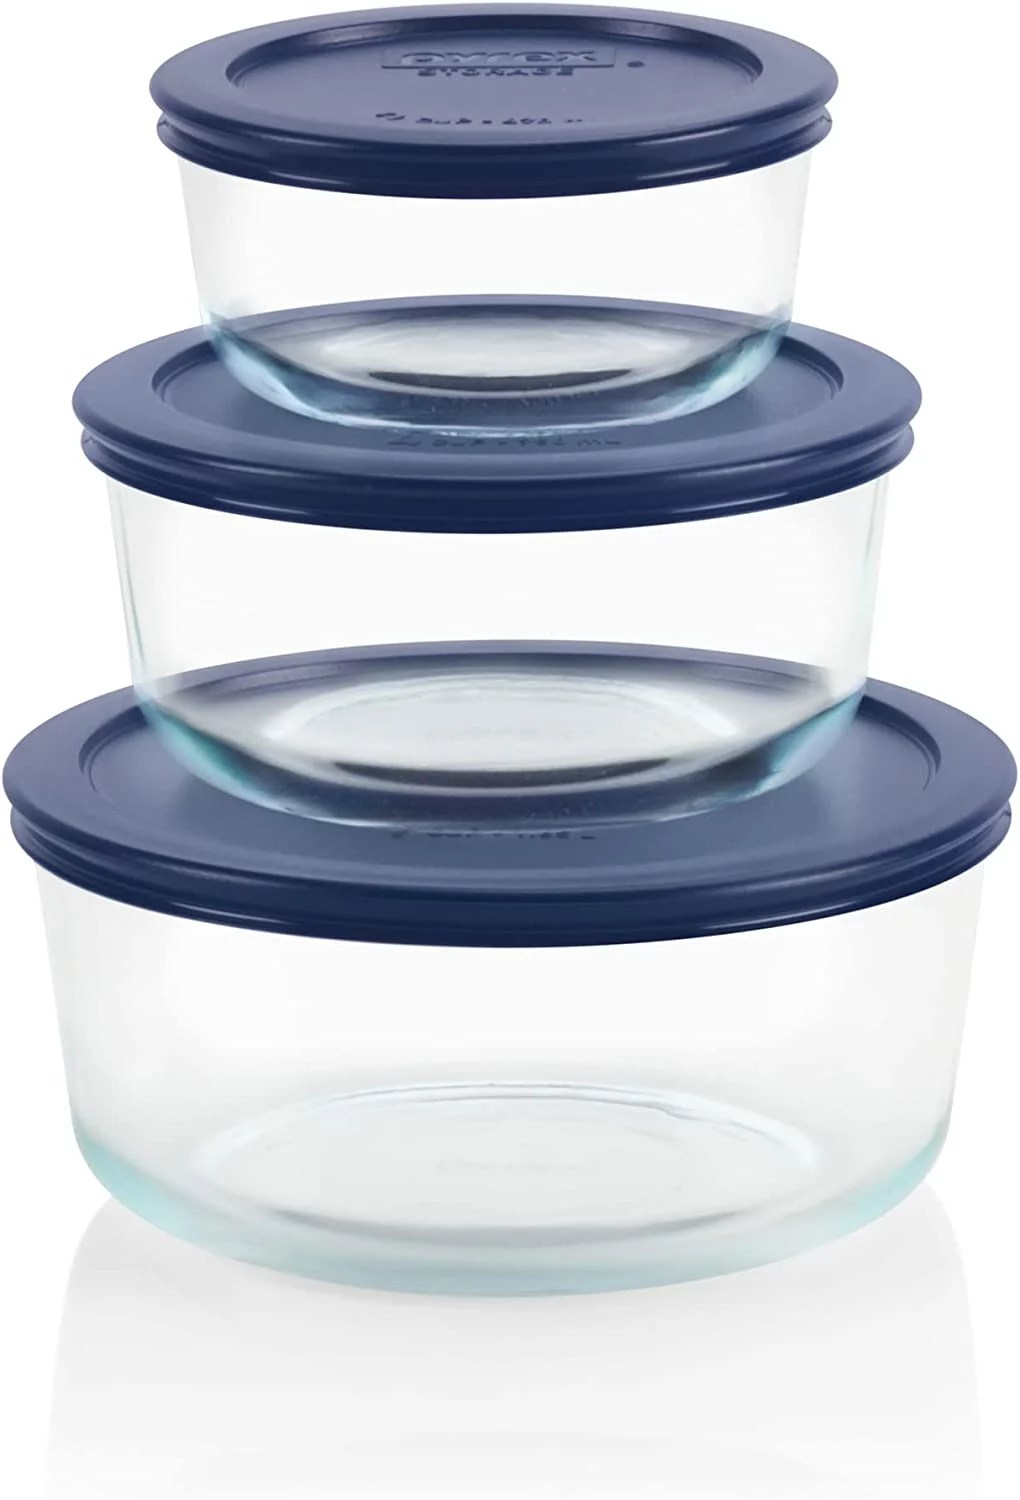 pyrex 6-piece glass food storage containers